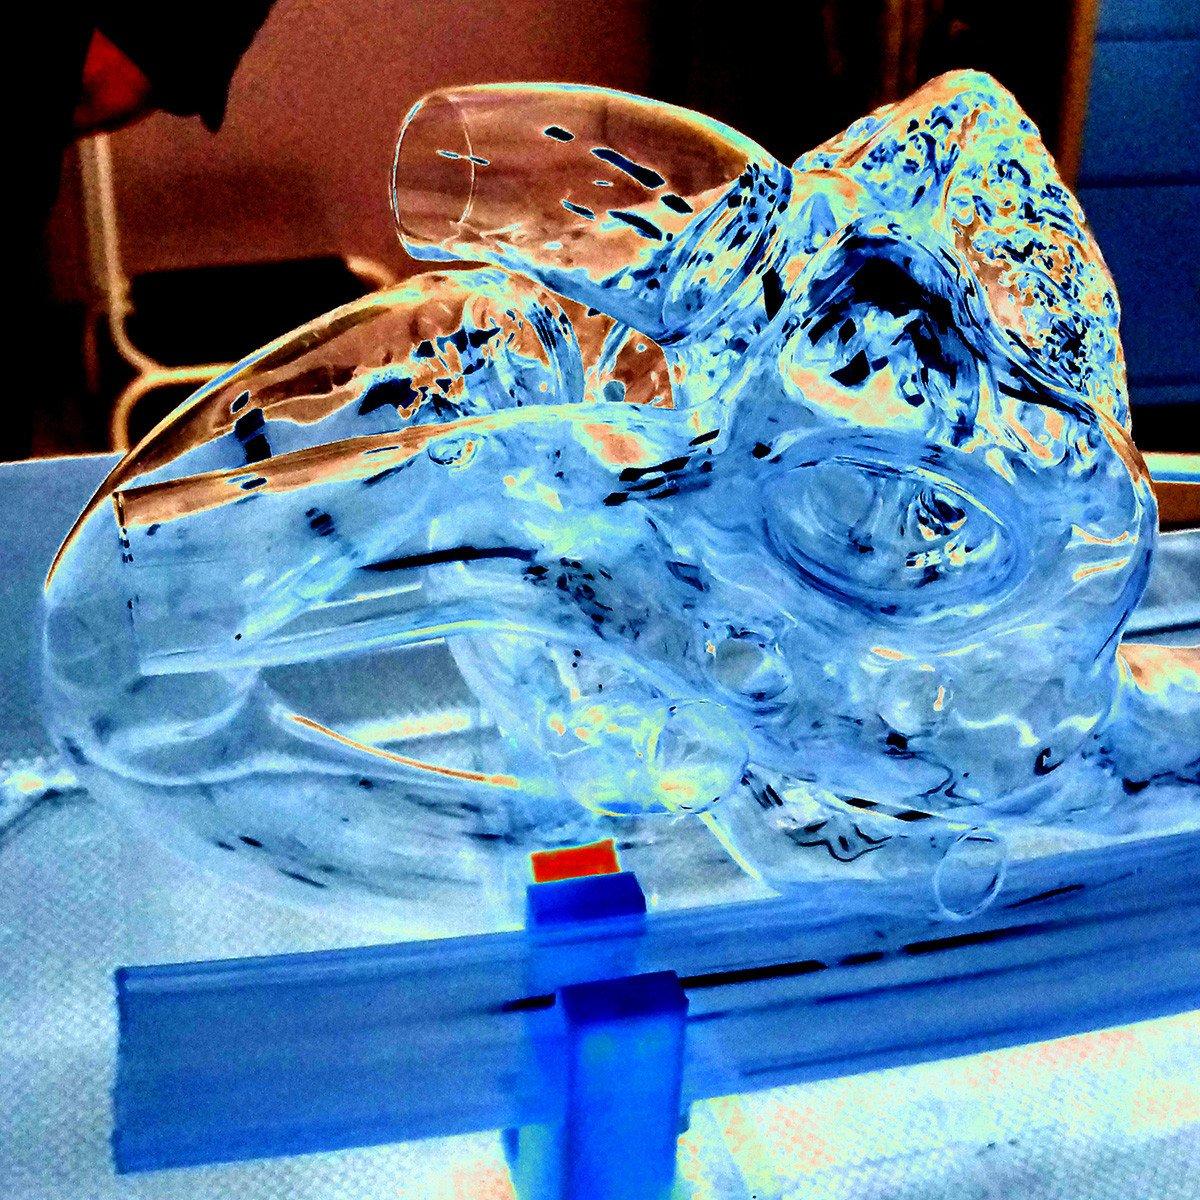 A glass heart used for developing robotic surgery and imaging technology and techniques